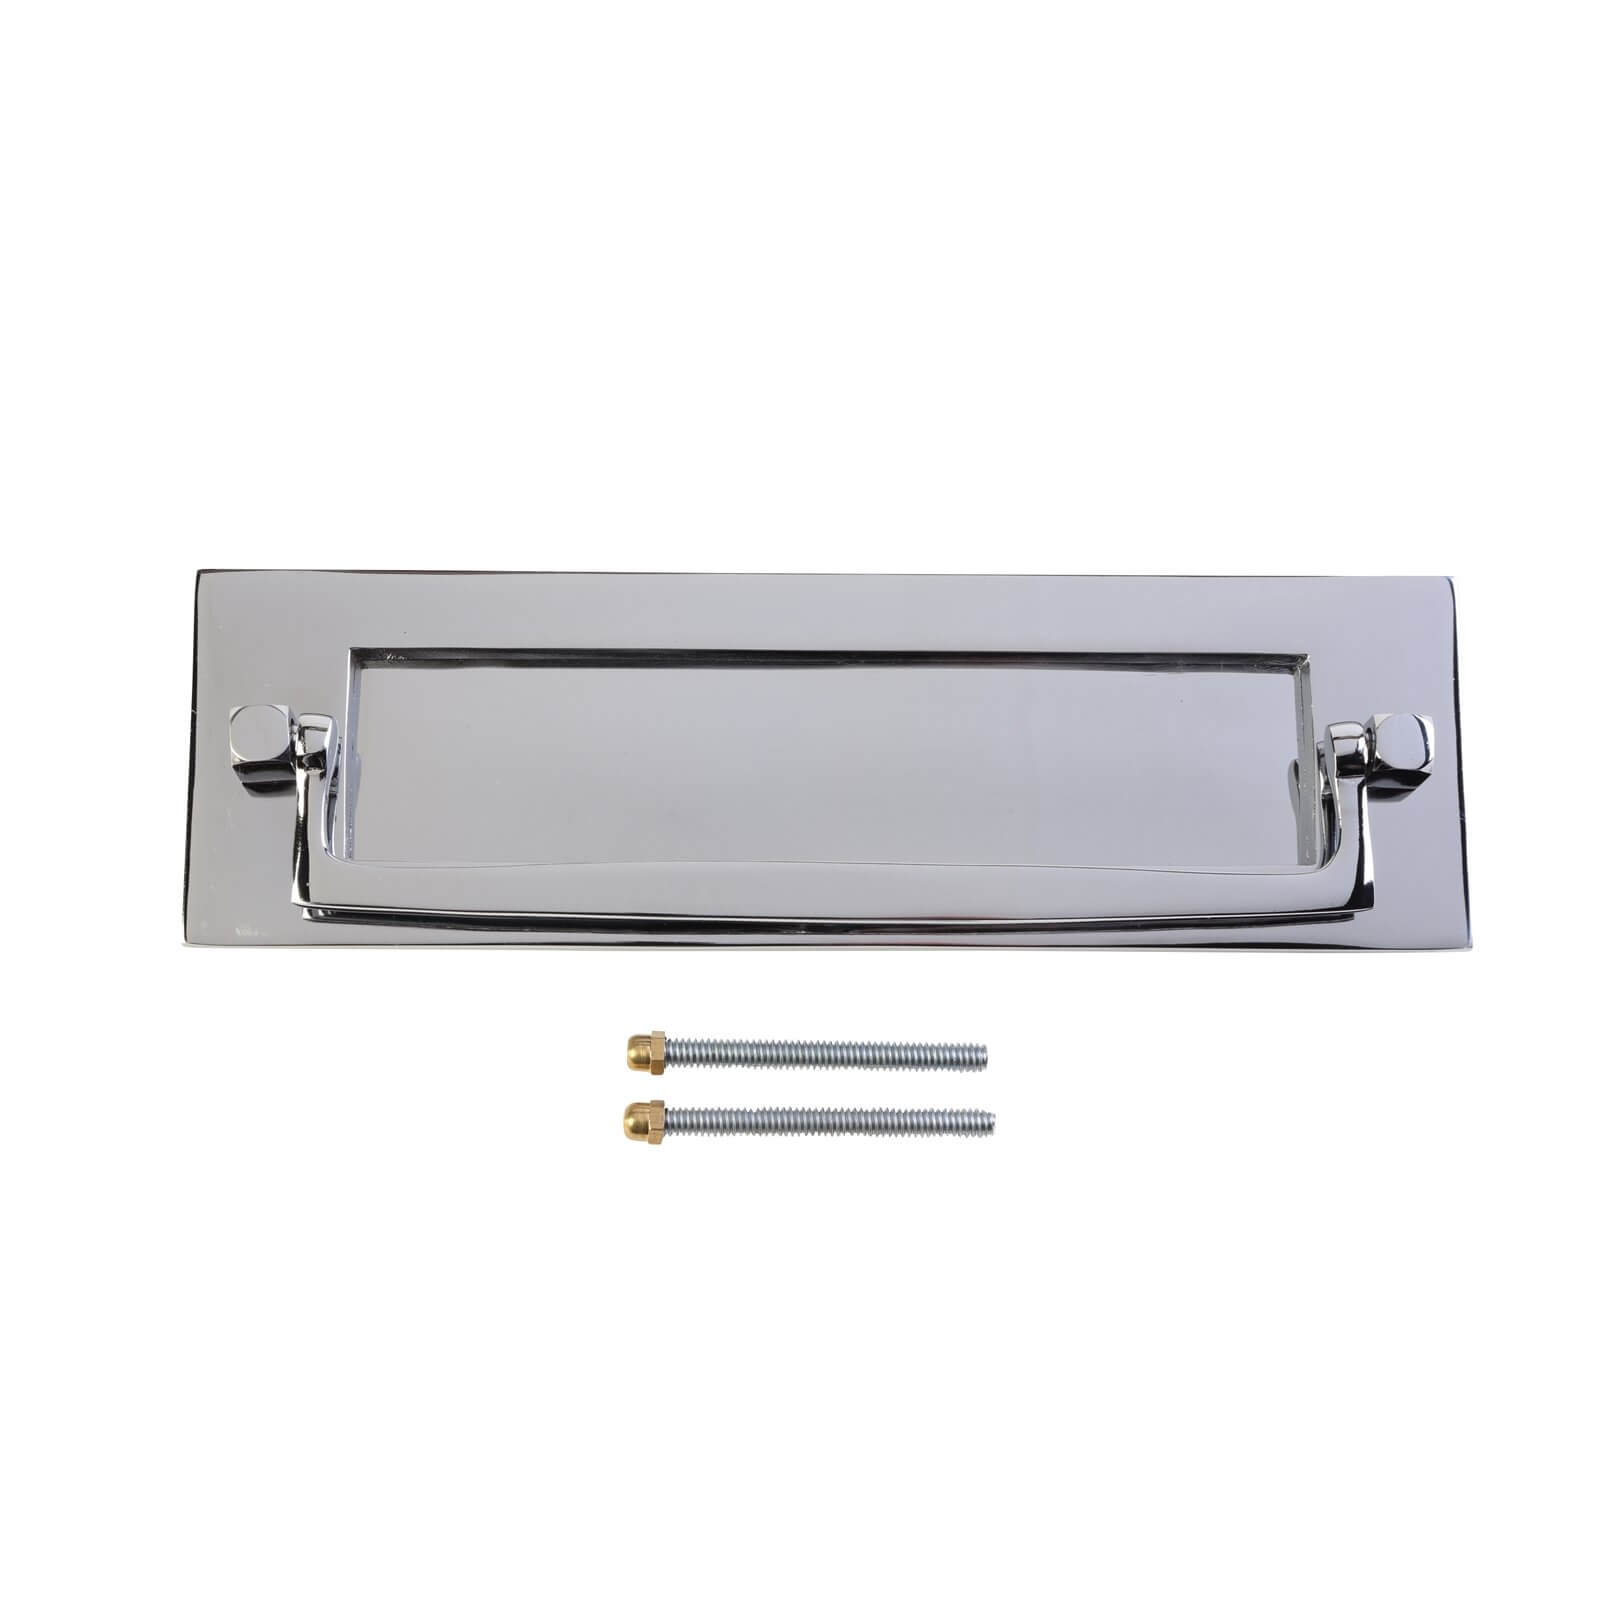 Chrome Letterplate with Knocker - 254mm x 77mm